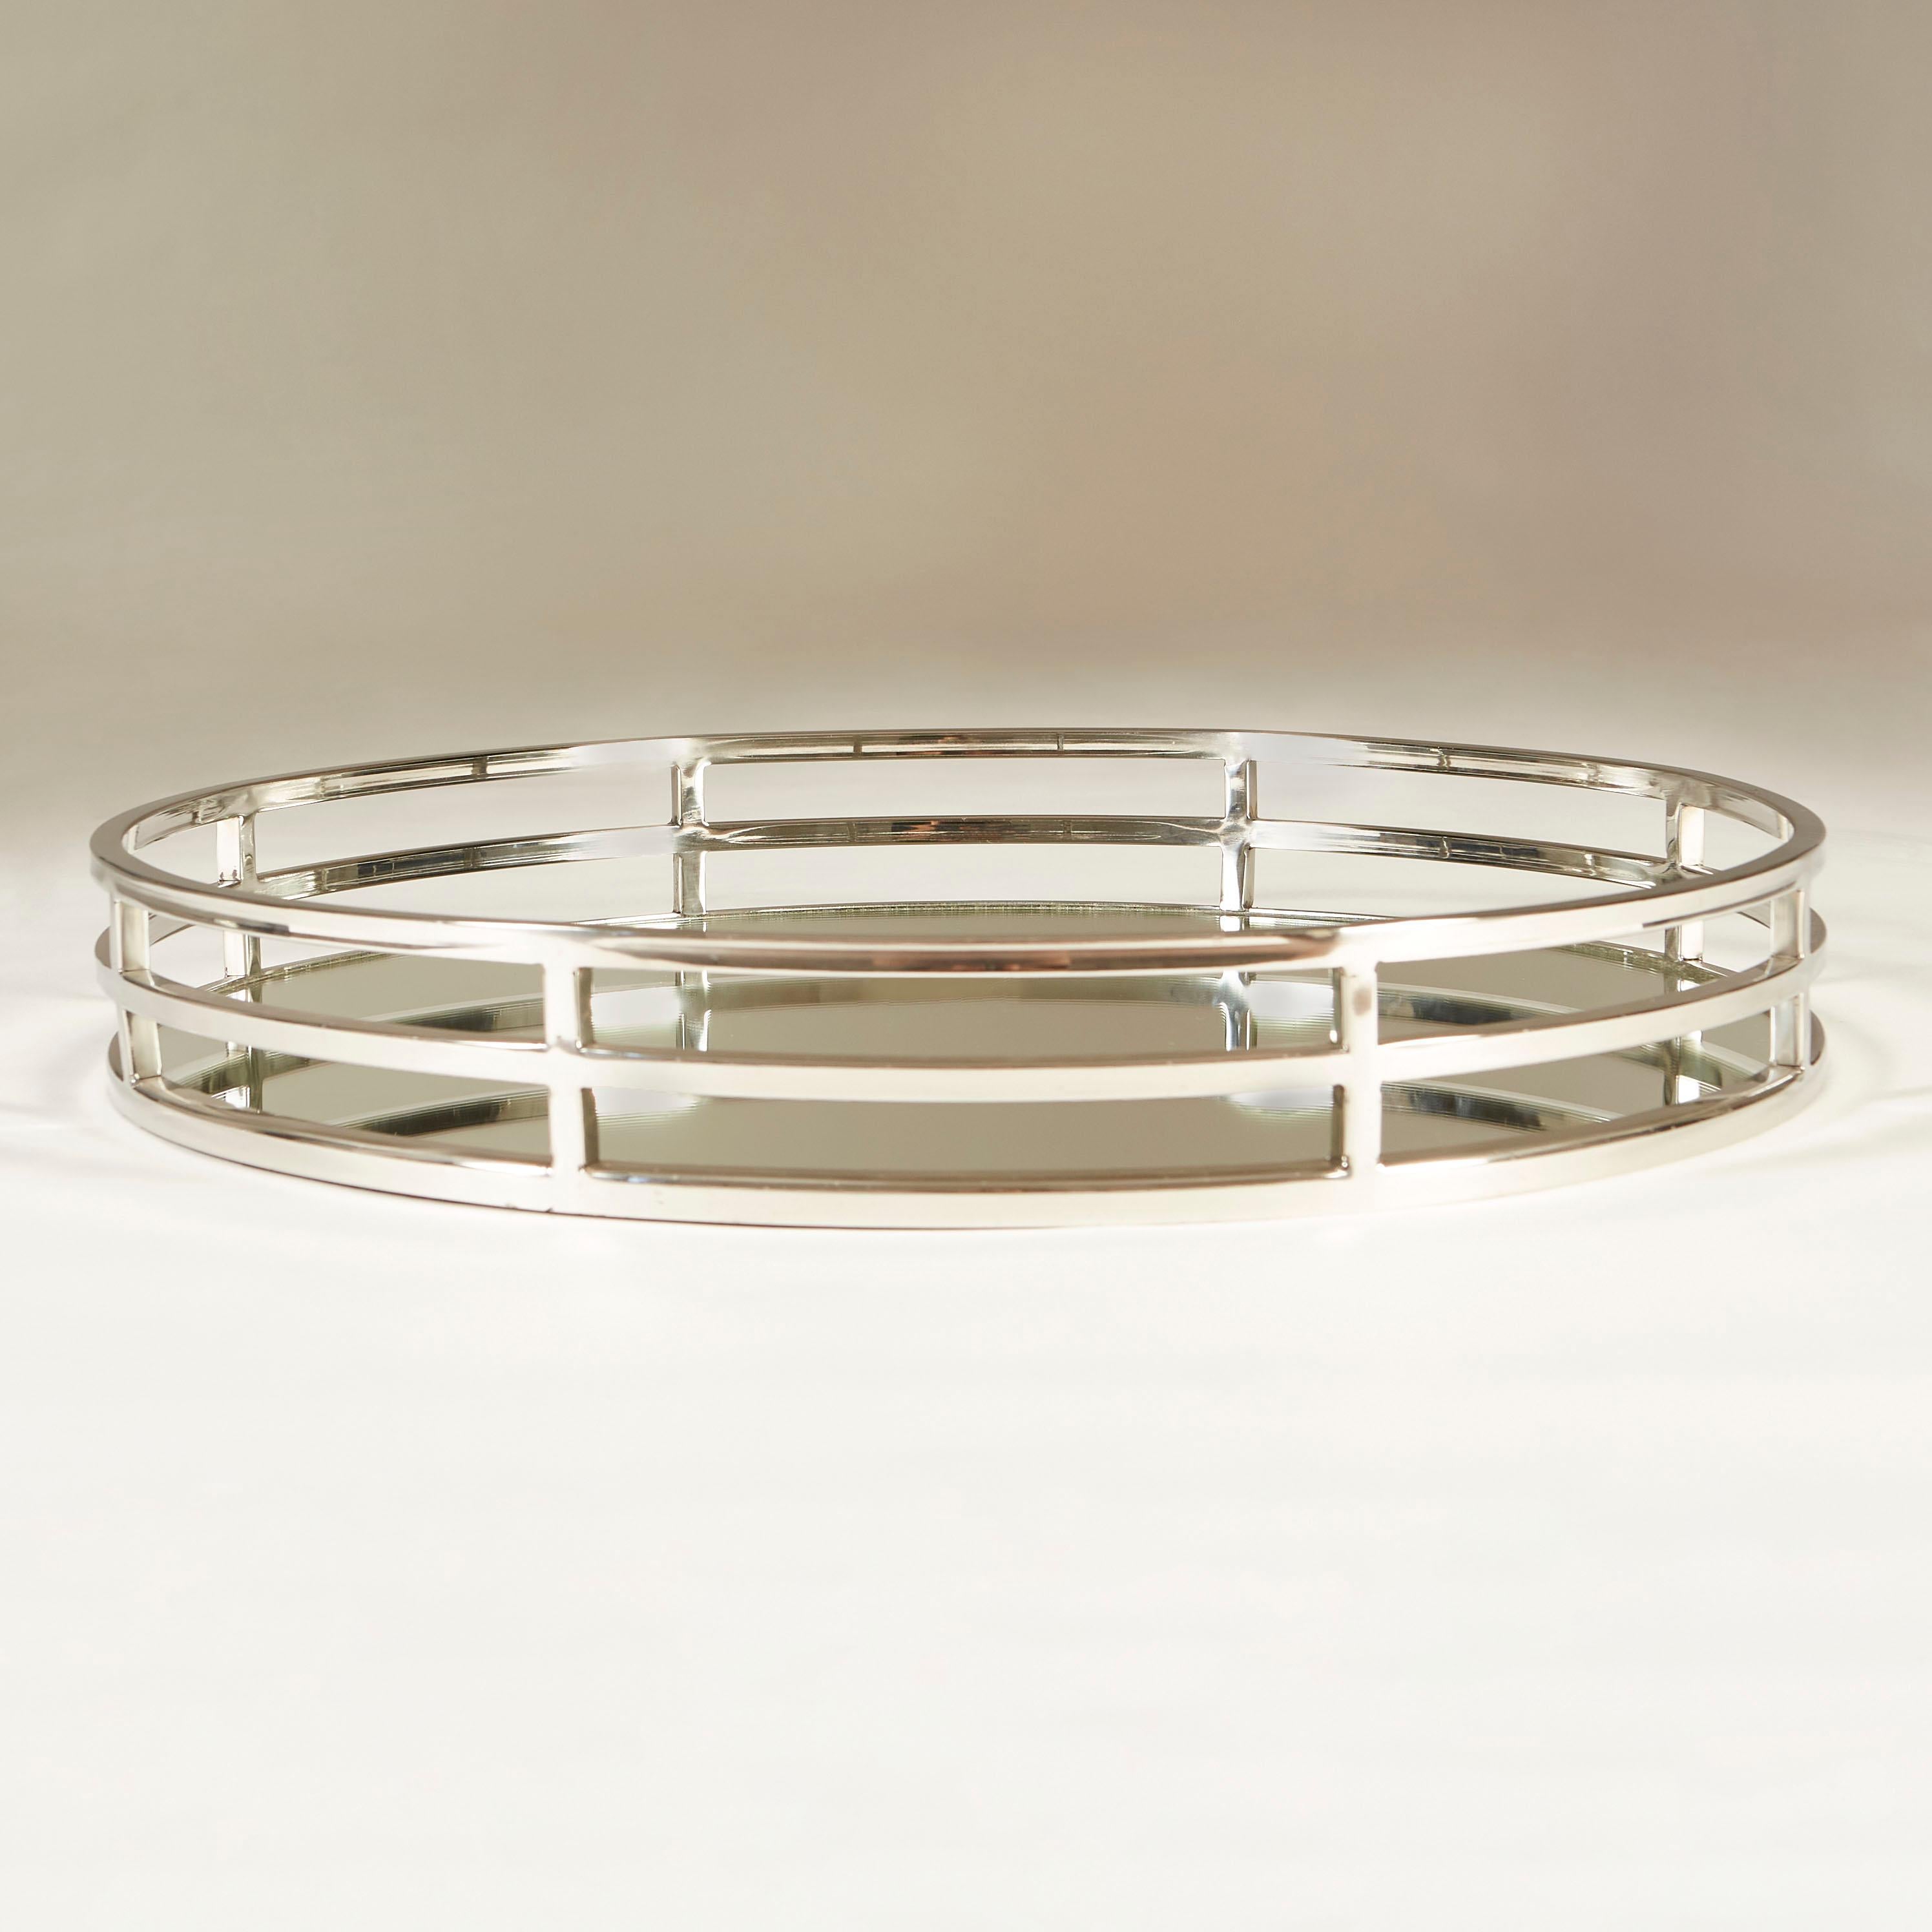 Substantial serving tray with three tiered decorative chrome surround and reflective mirrored base.